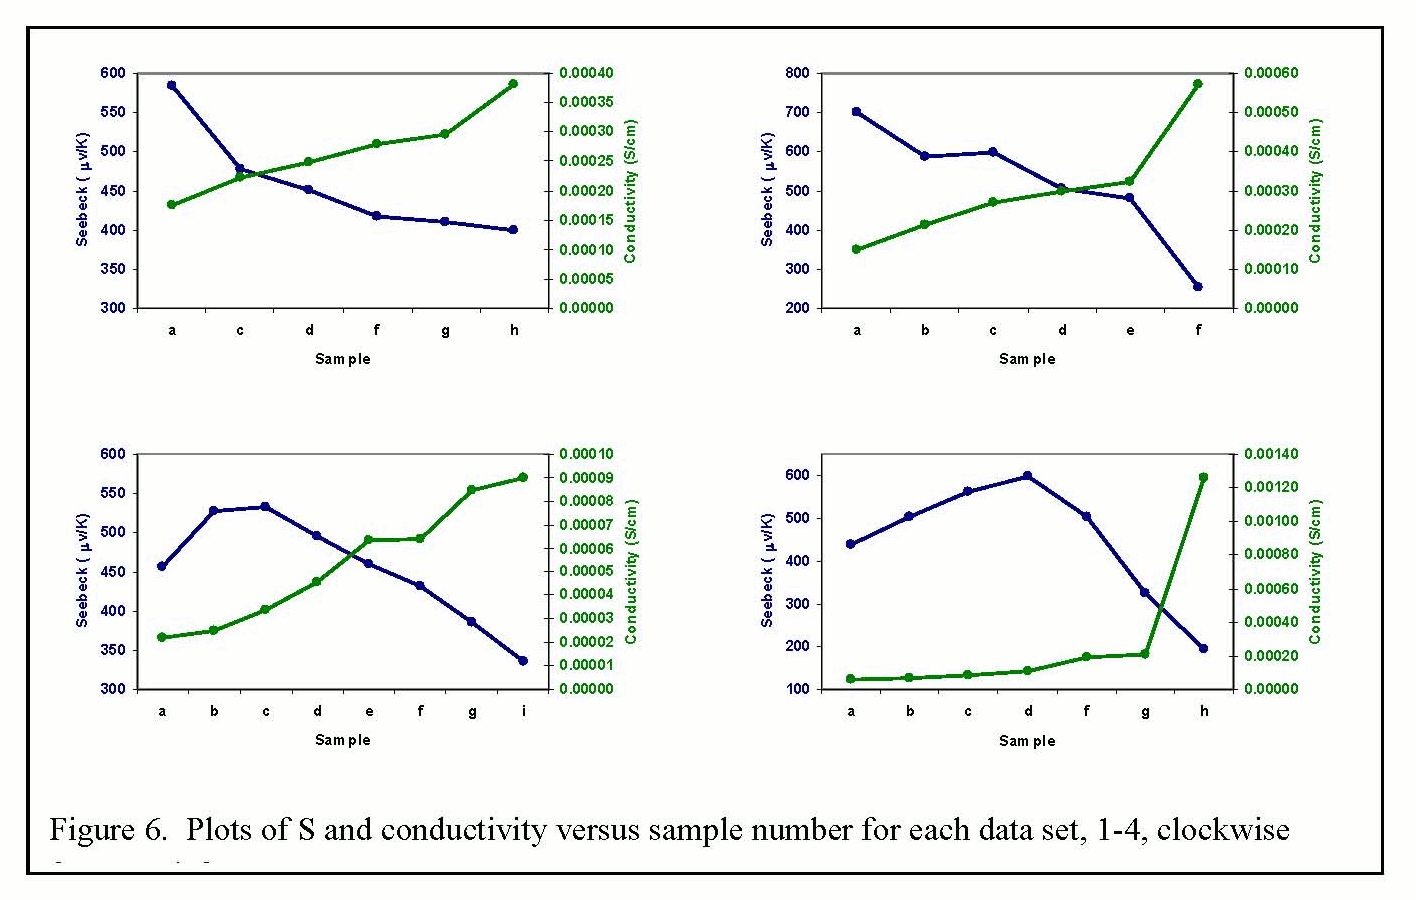 Text Box: Figure 6. Plots of S and conductivity versus sample number for each data set, 1-4, clockwise from top left.